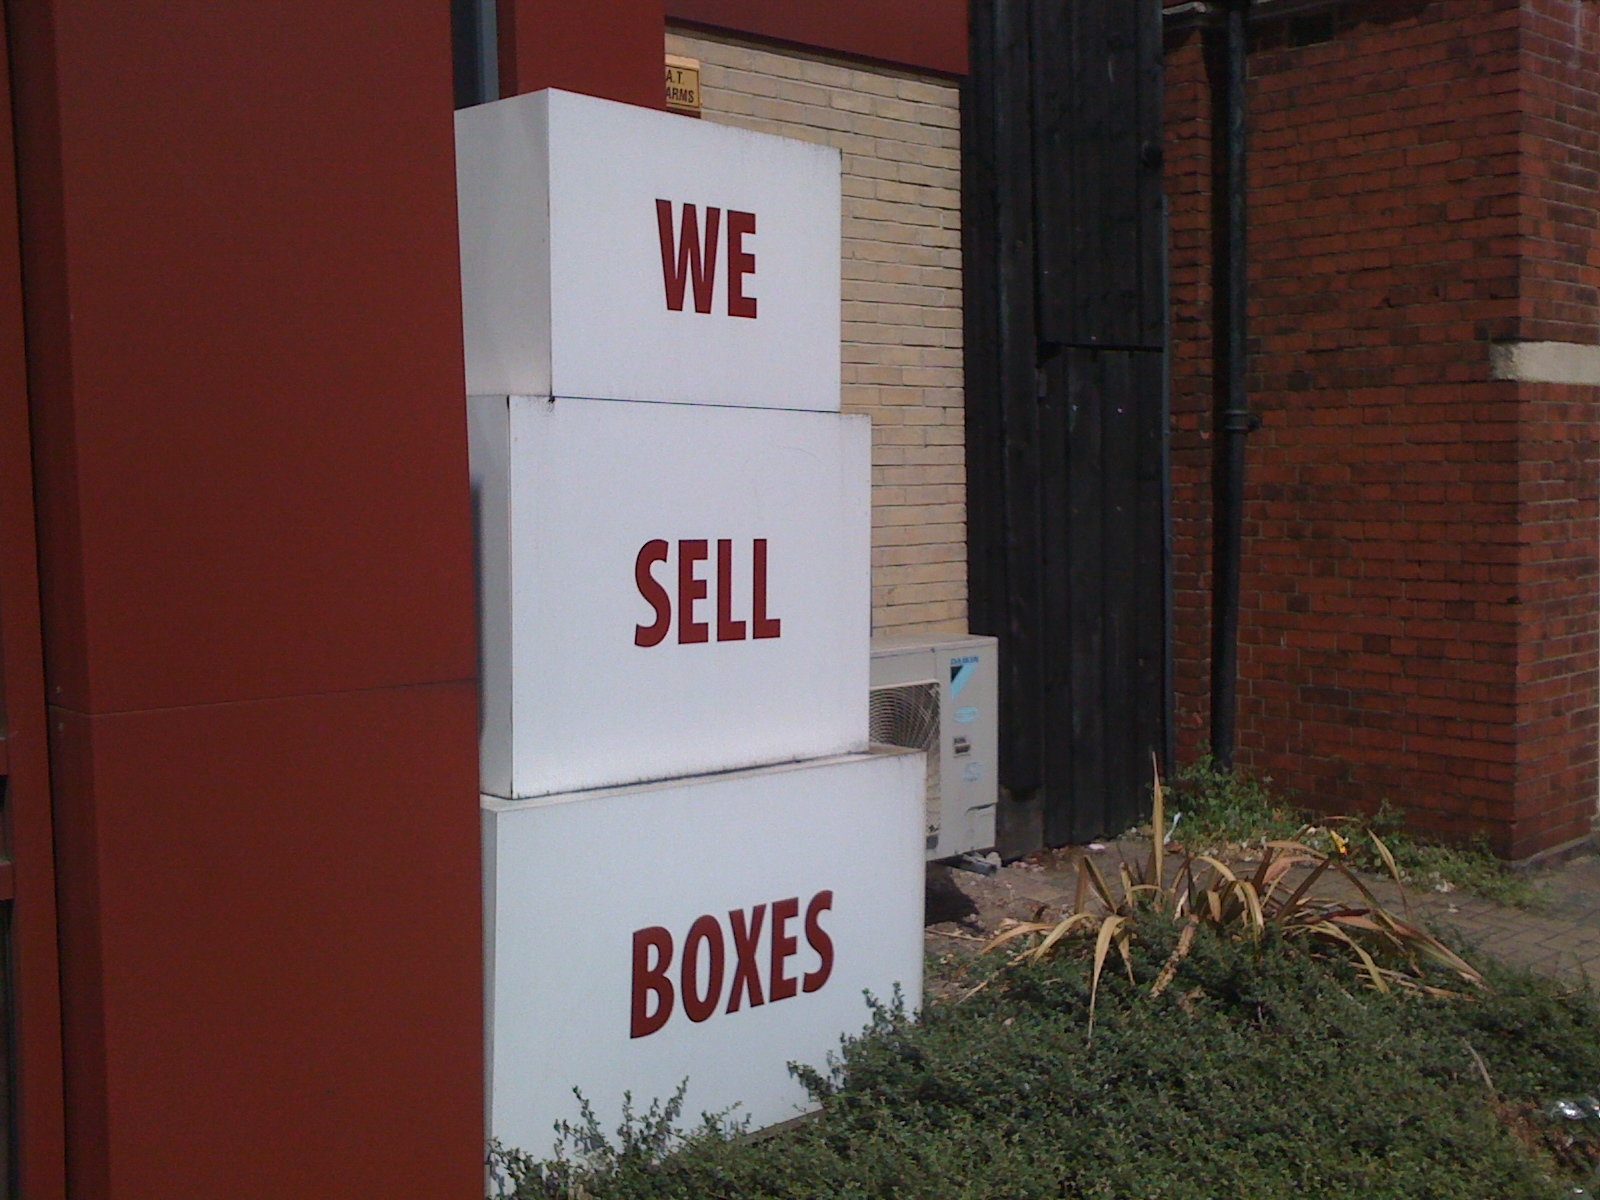 Managing a self storage facility: What extra items can I sell?